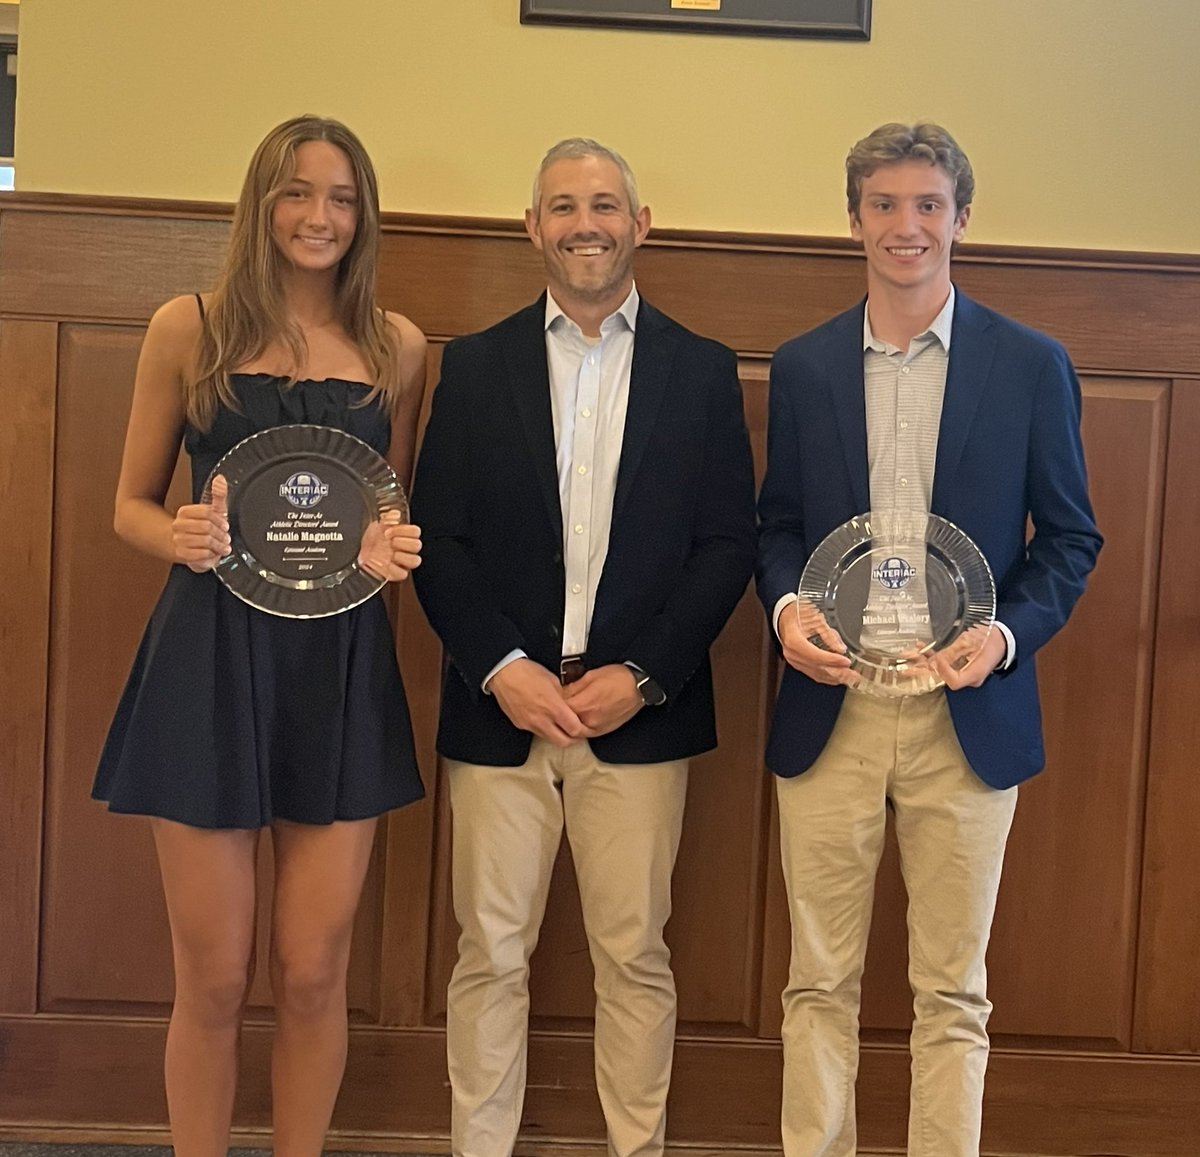 Congrats to Seniors Natalie Magnotta and Michael Woolery who were selected for this year's Inter-Ac Directors' Awards. Both Natalie (soccer) and Michael (cross country) will continue their athletic careers at Penn State next year. Go EA! @EA1785_BTrack @EA1785_GSoccer